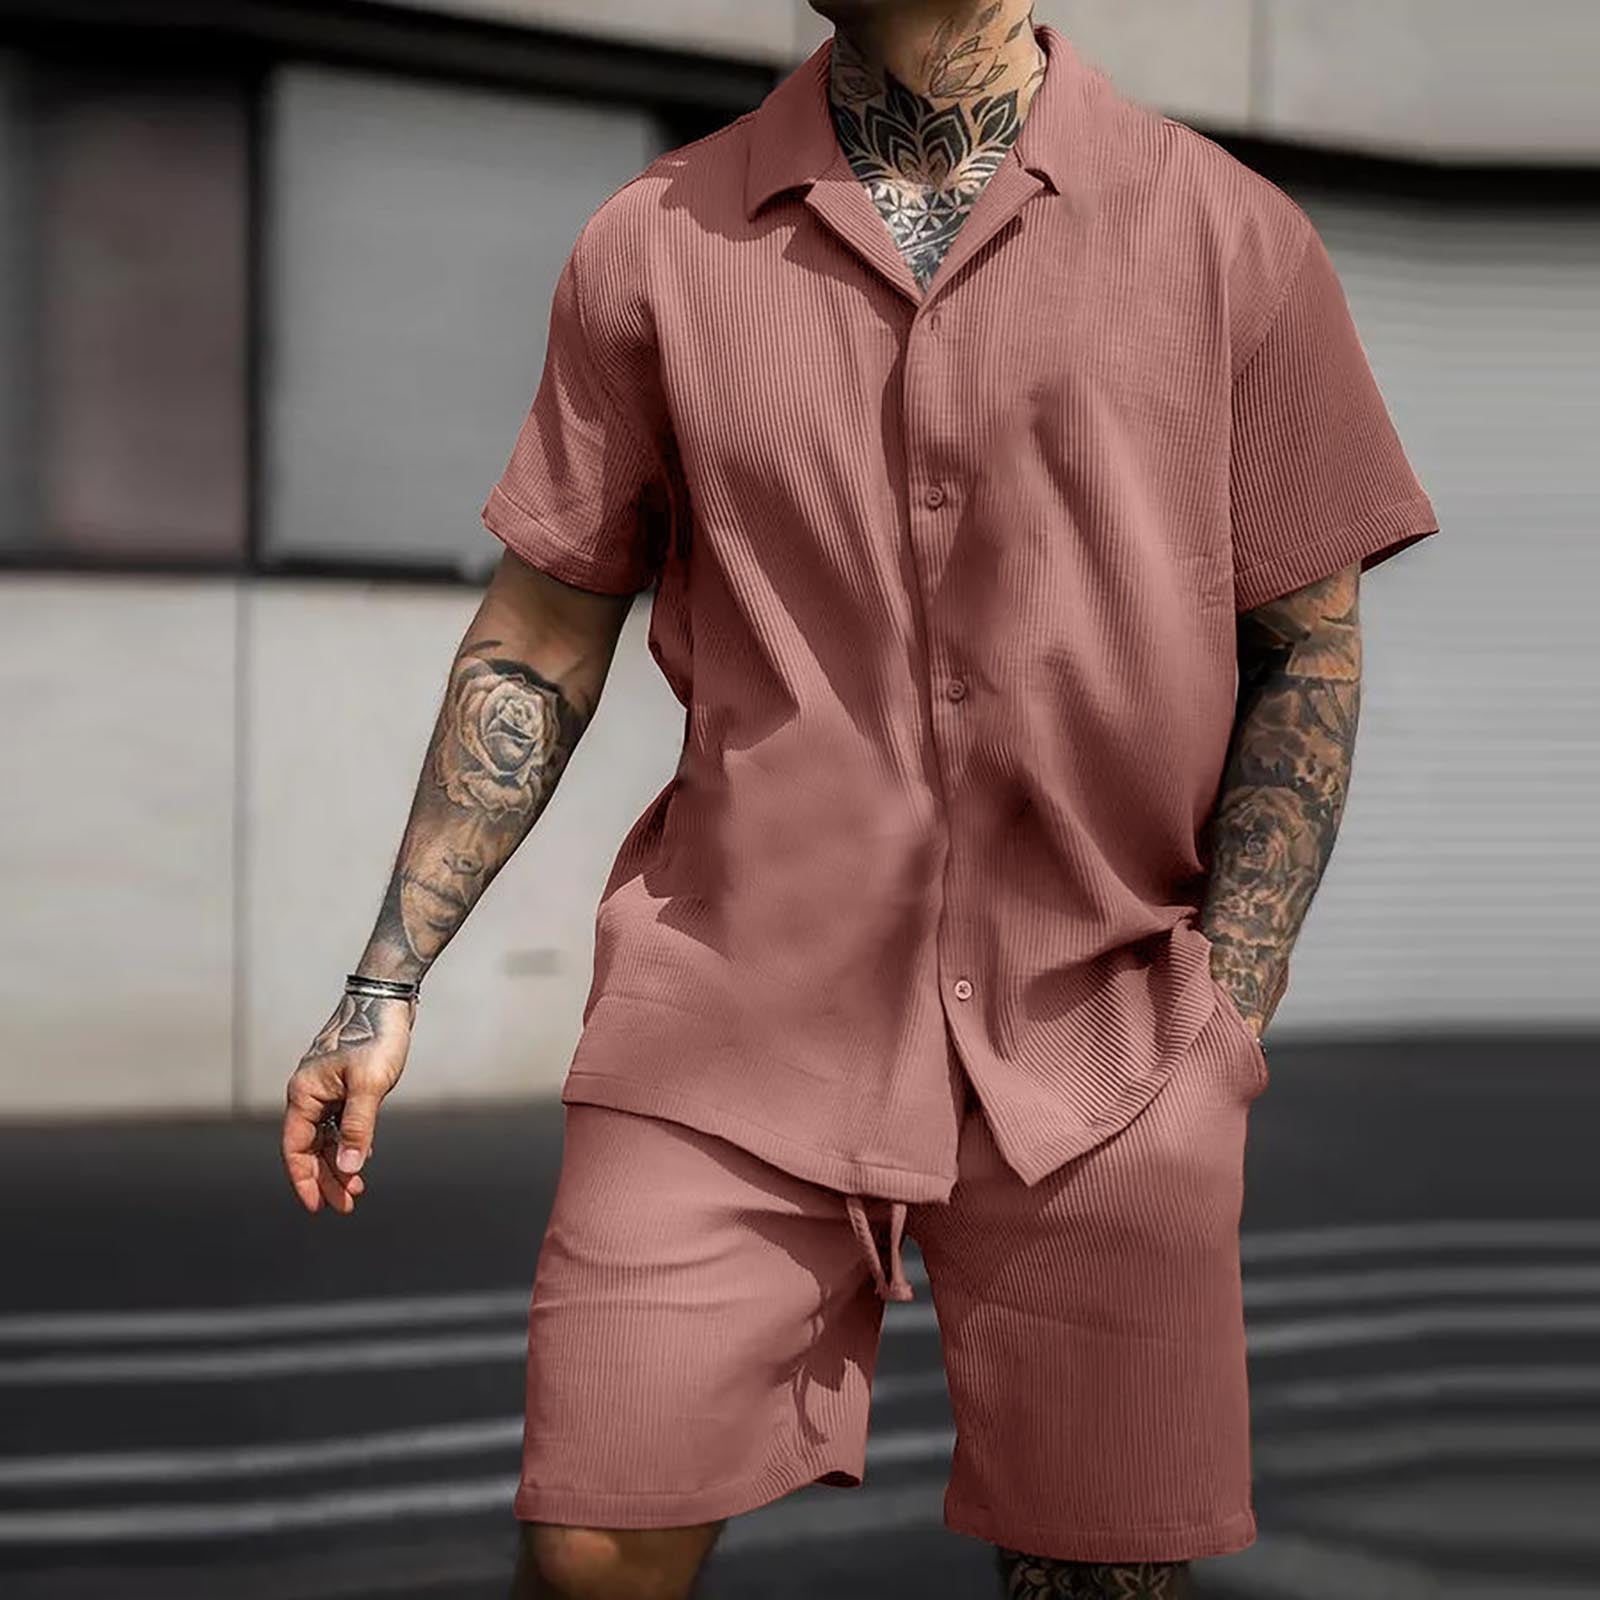 BSDHBS Outfits for Men Male Summer Top Shirt and Shorts Set 2 Piece Outfits  Fashion Casual Short Sleeve Tracksuit Set for Men Brown Size XXL 